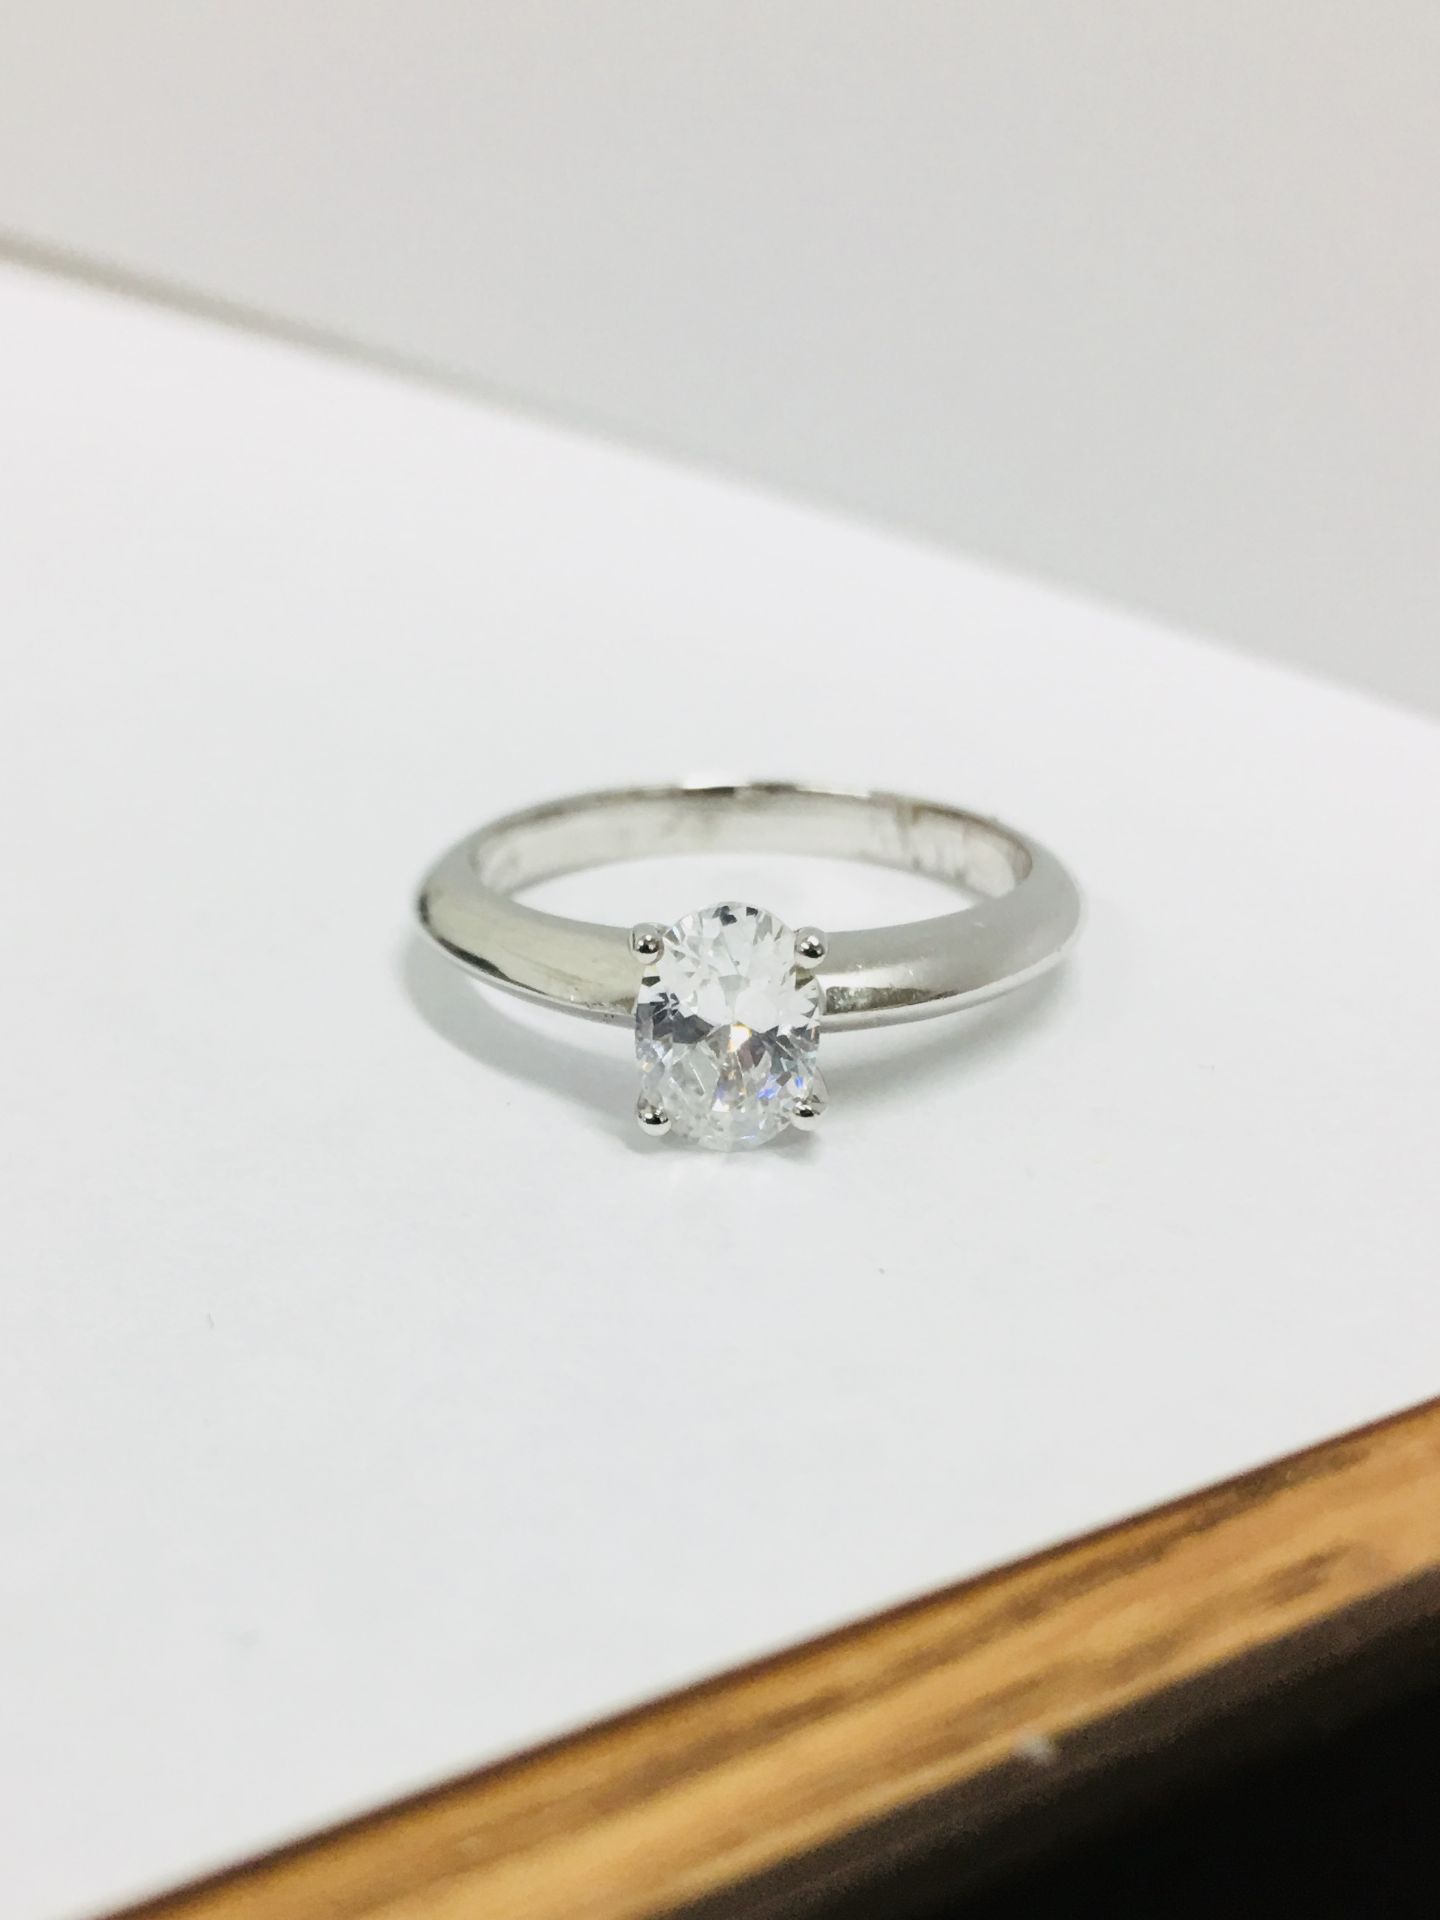 Platinum oval diamond solitaire ring.0.30ct oval diamond si clarity i colour,2.9gms platinum setting - Image 3 of 4